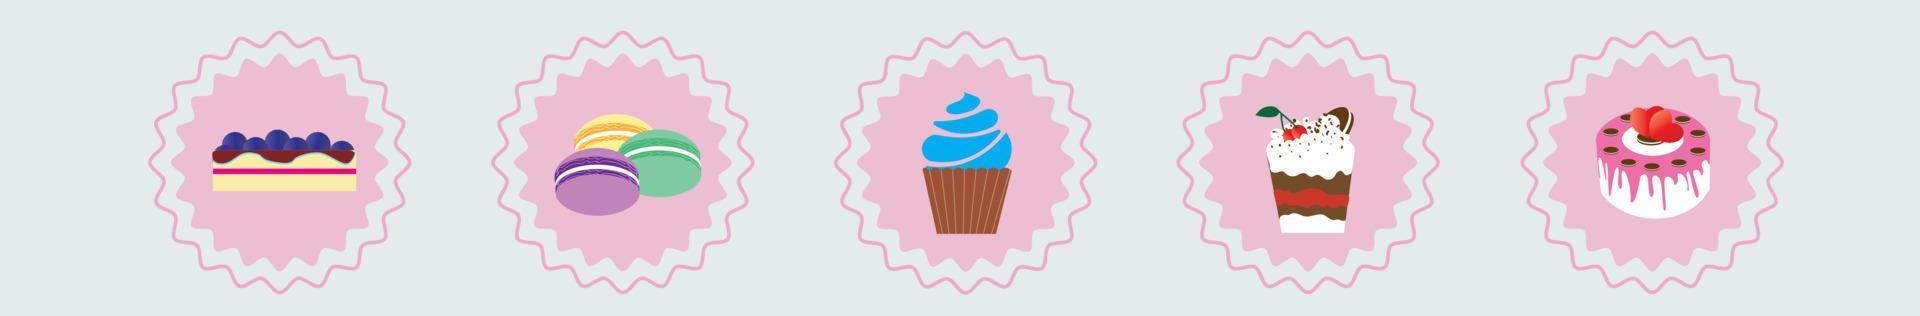 vector icons depicting sweets